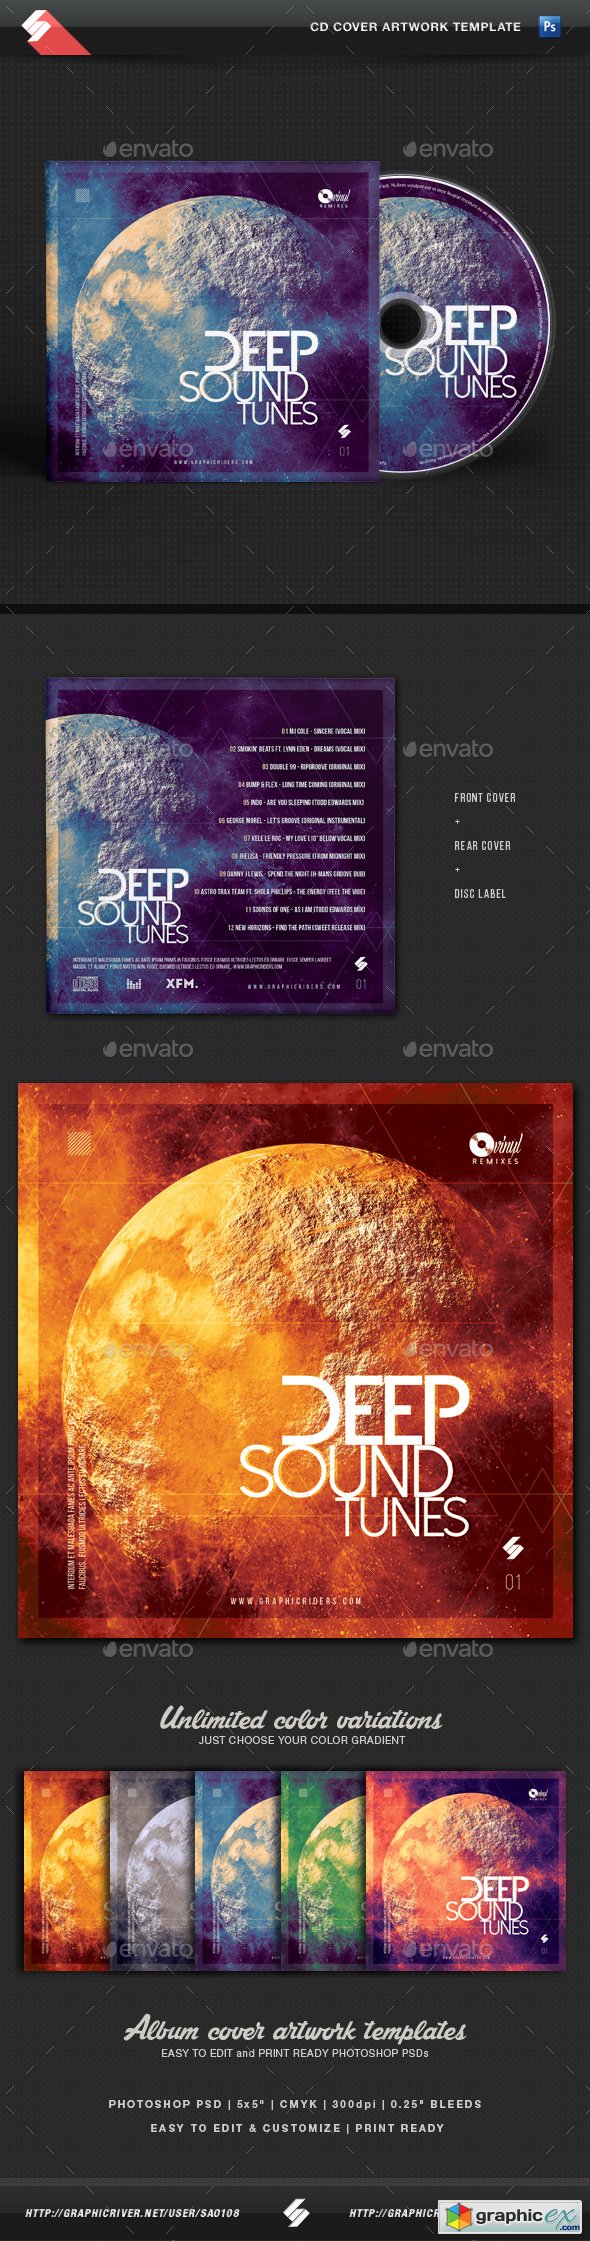 Deep Sound Tunes - CD Cover Template